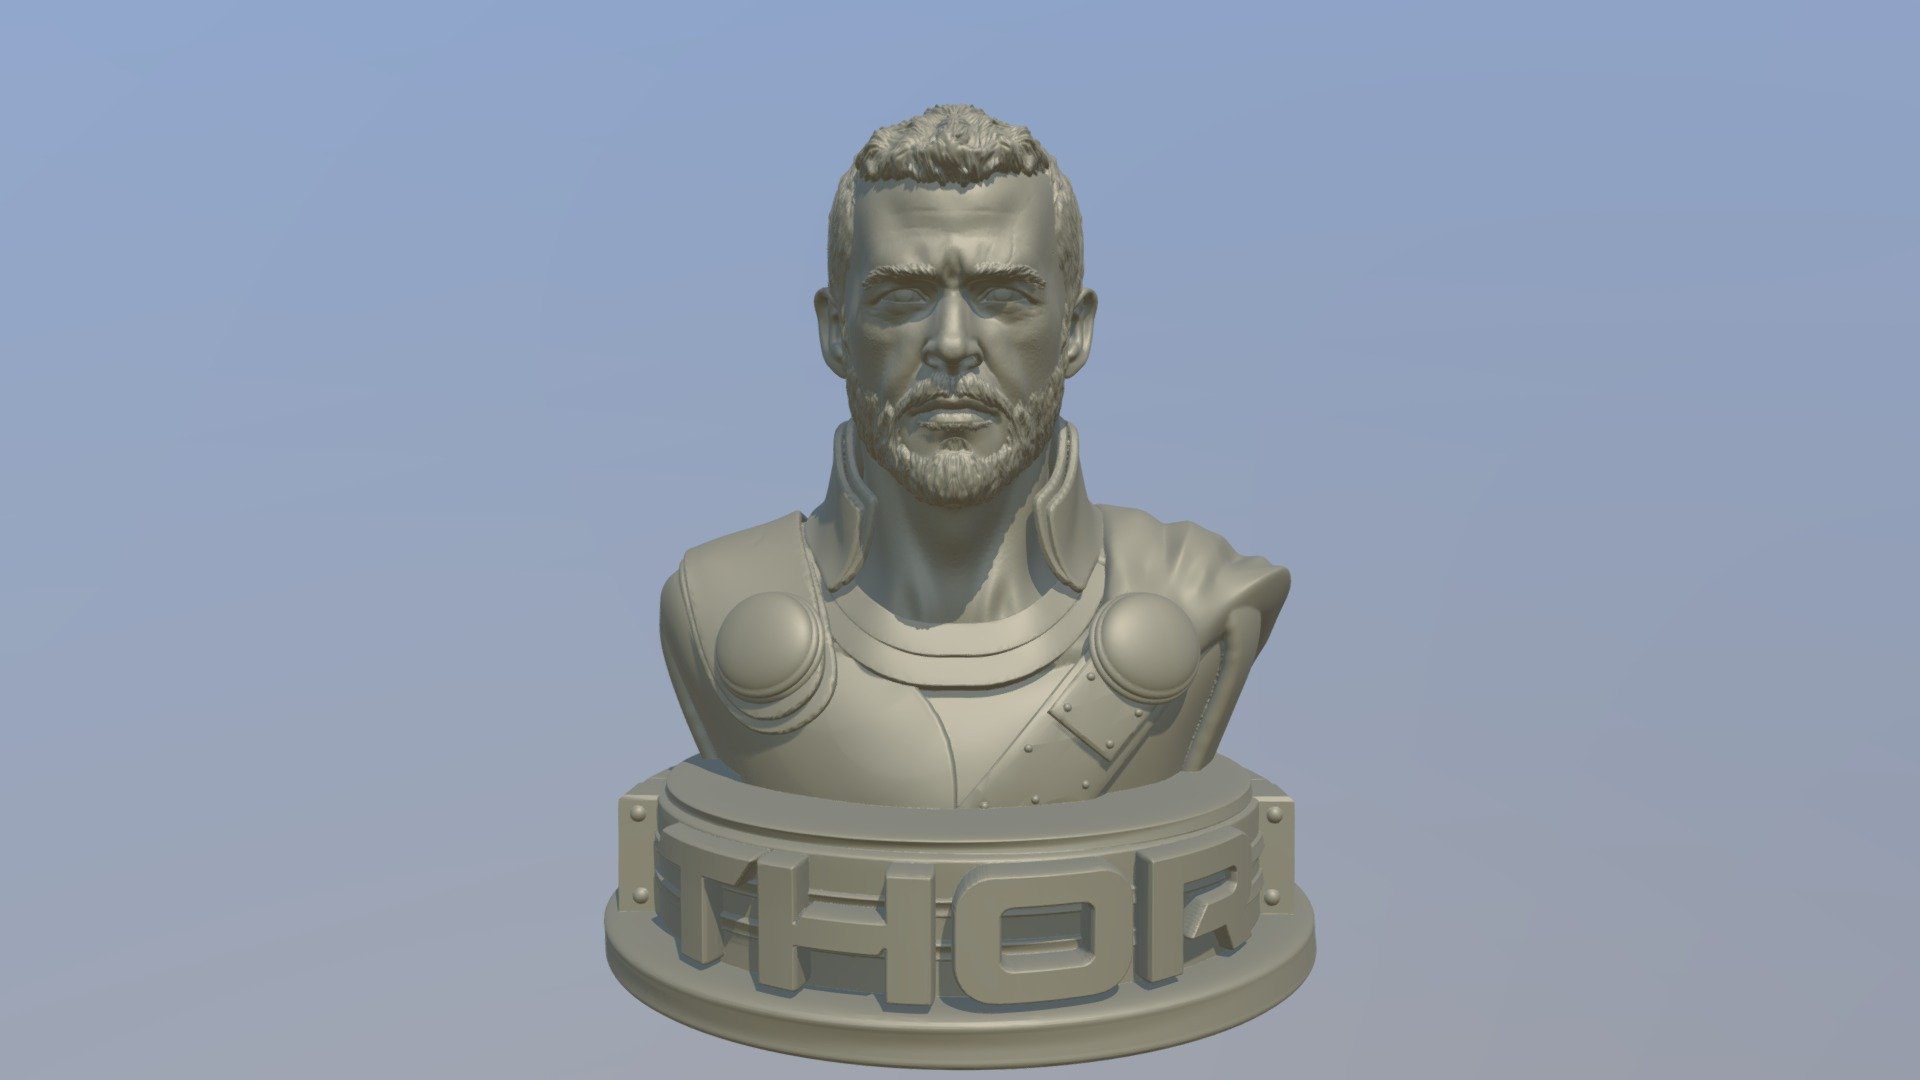 Chris Hemsworth as MCU Thor bust from Thor Ragnarok and Avengers 4   For more renders and info please visit my Artstation page https://www.artstation.com/konstantinkireev - Chris Hemsworth as Thor 3D print model - 3D model by kostikim 3d model